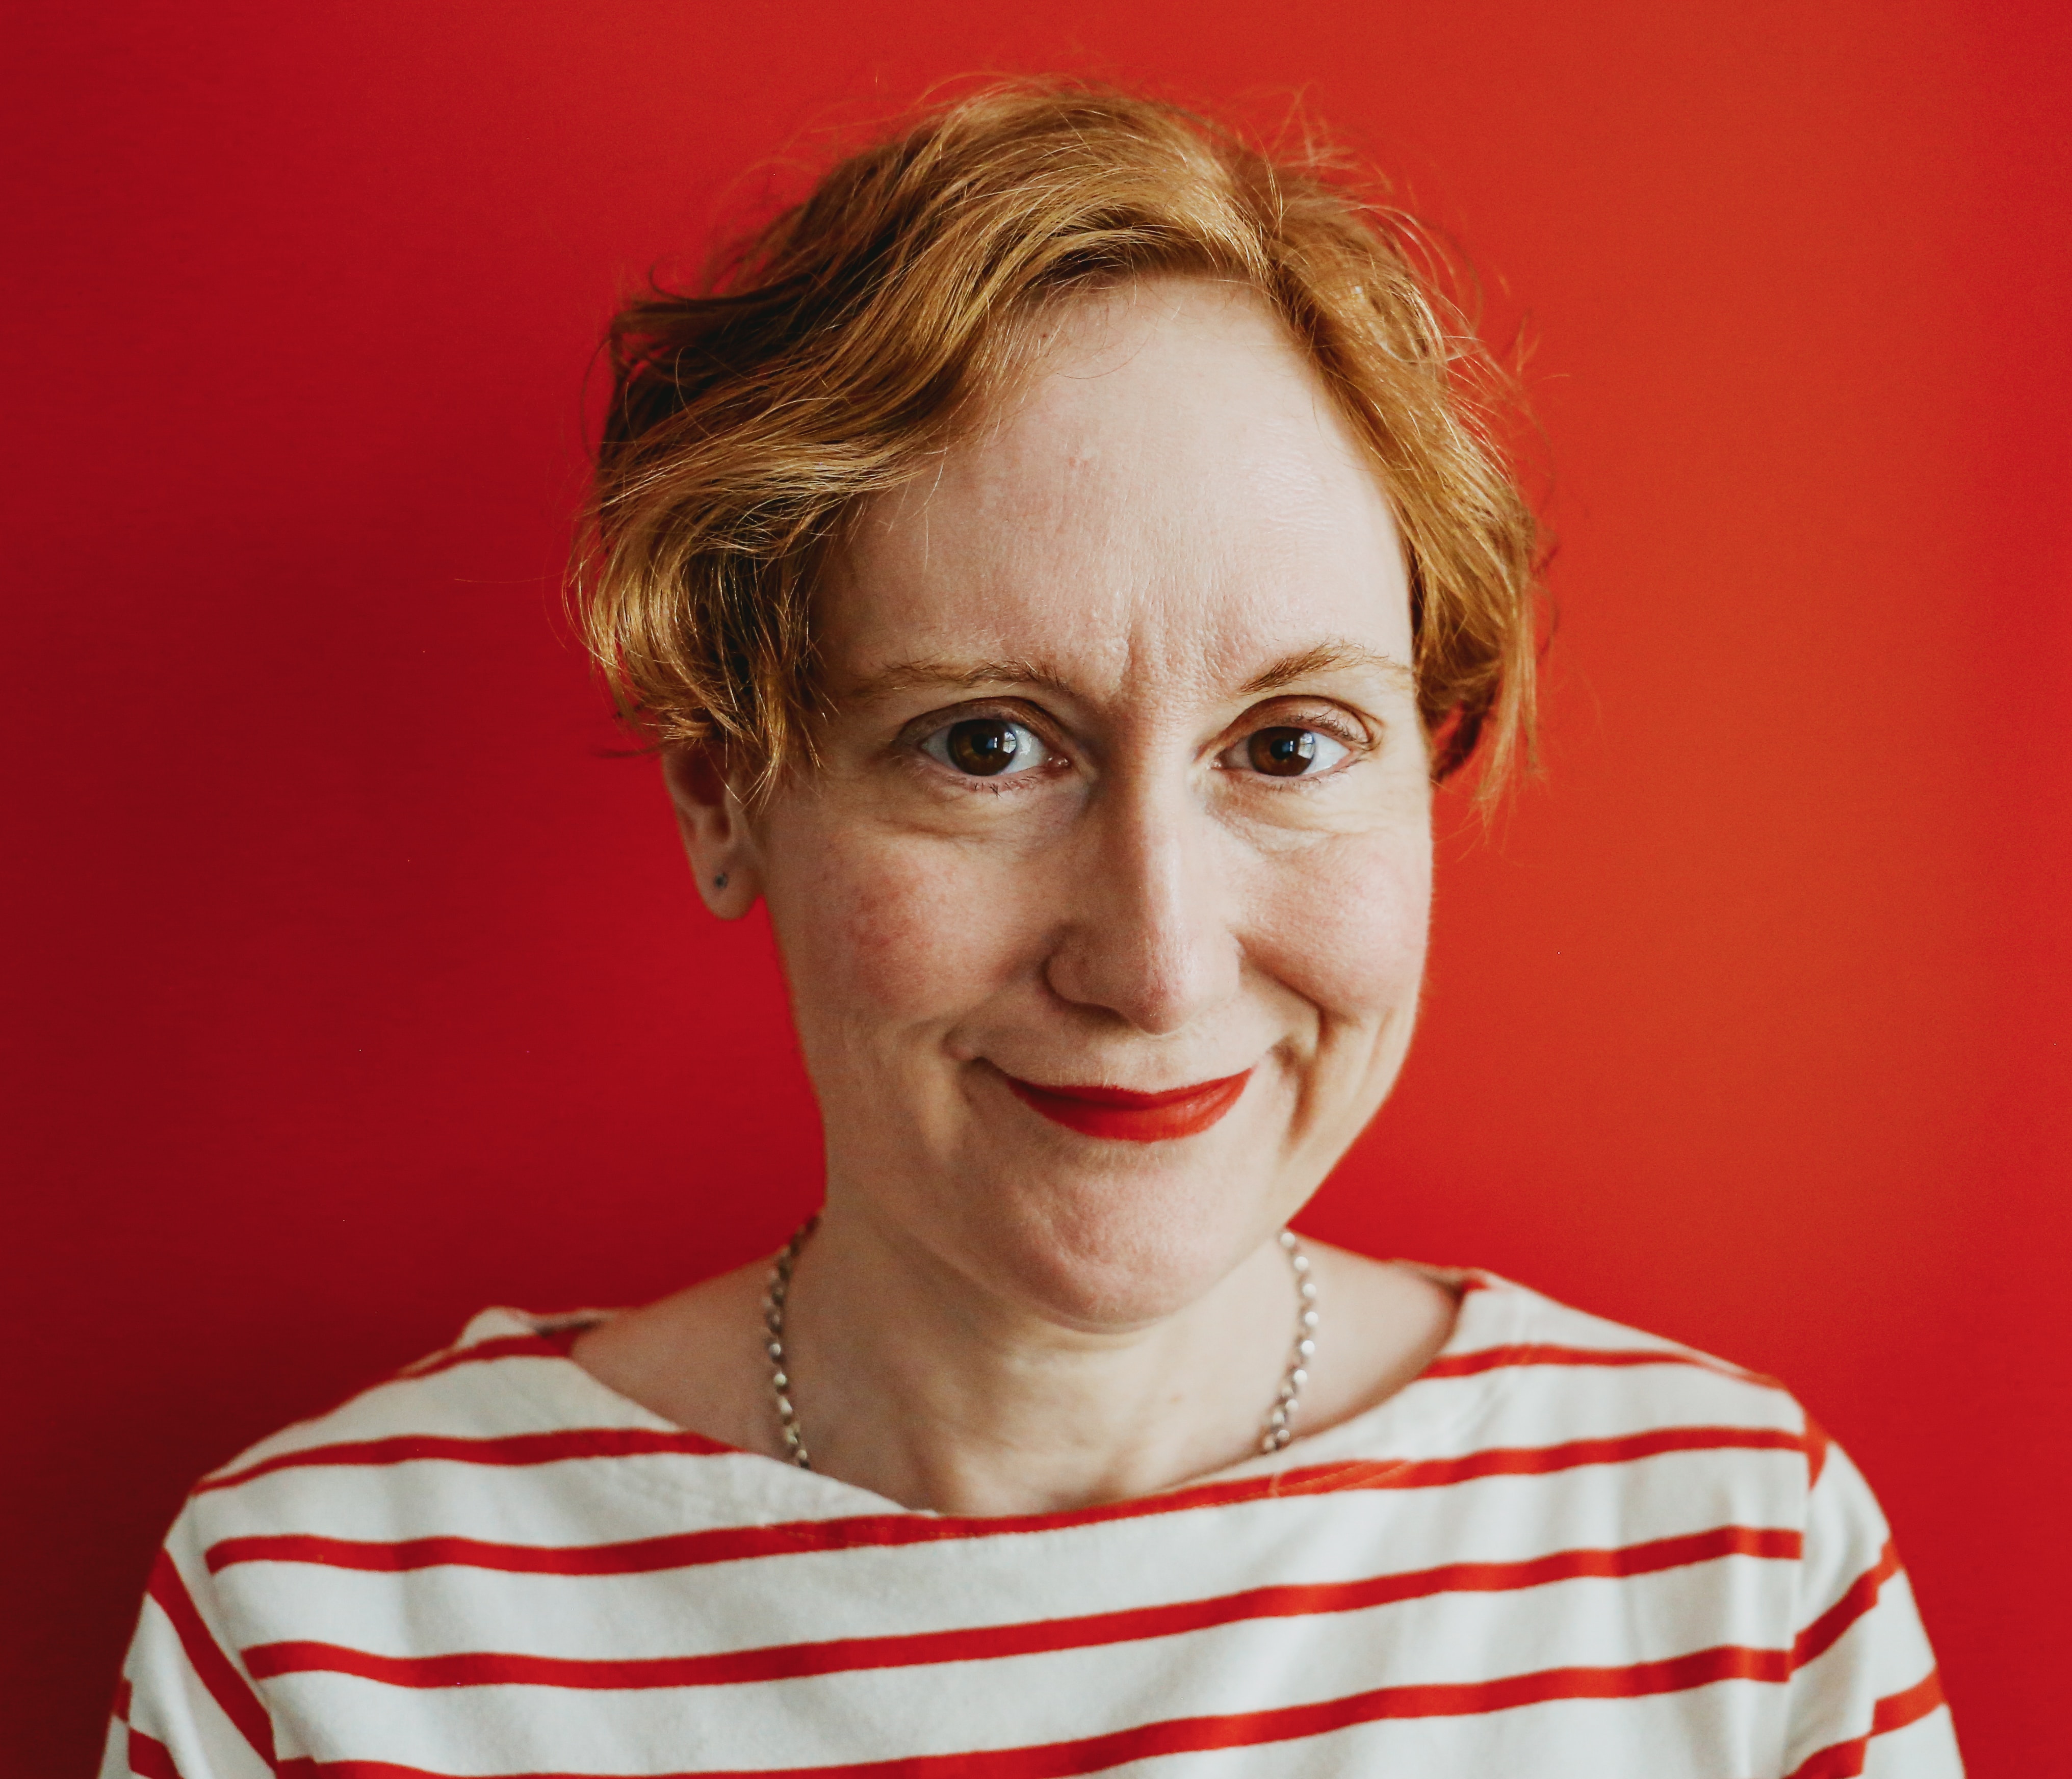 Headshot of female with short orange coloured hair wearing a white and red striped top in front of red background.